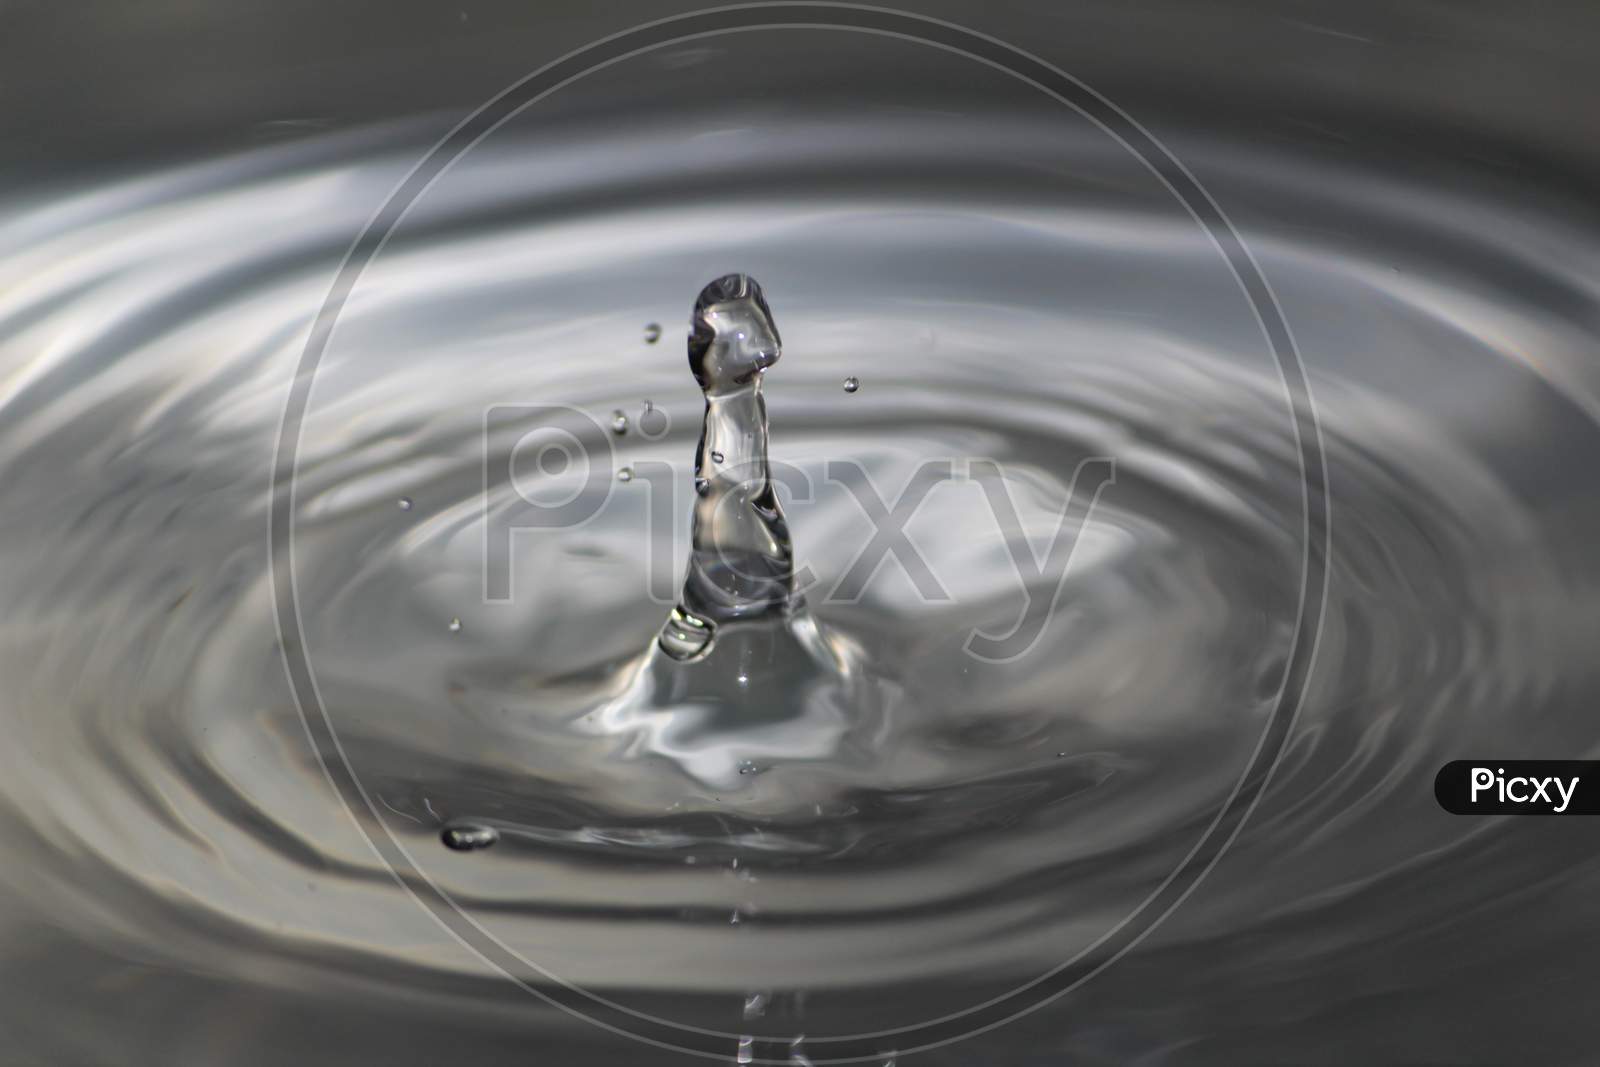 Water Drop Falling Down In A Tub Of Water